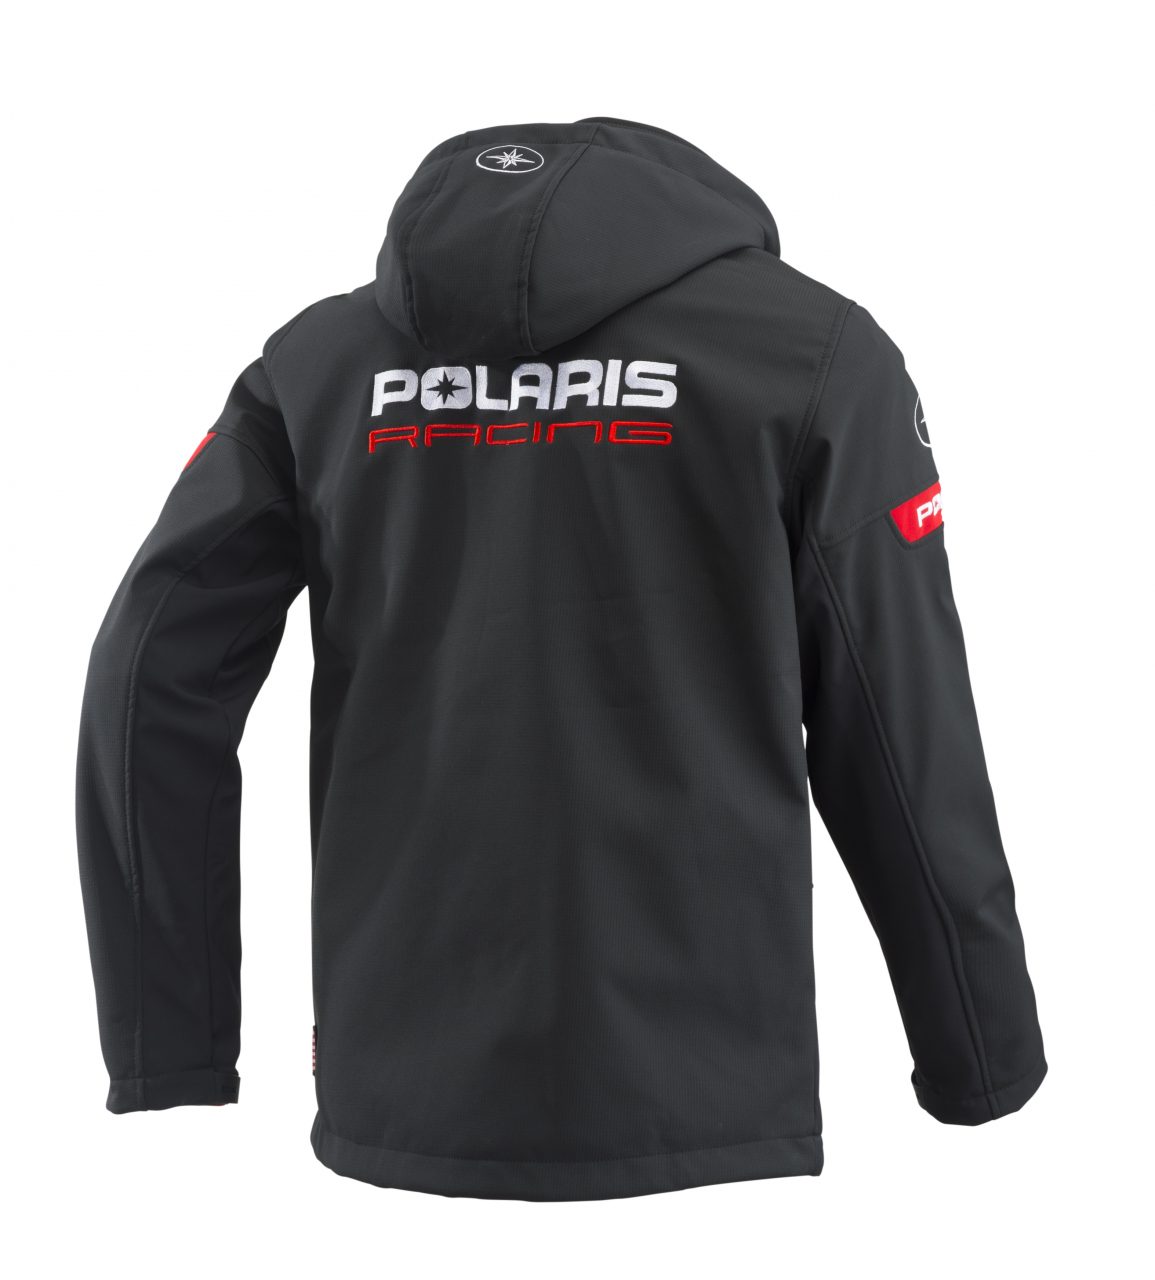 New clothing collection for 2019 | Polaris ORV Media – Europe, East & Africa